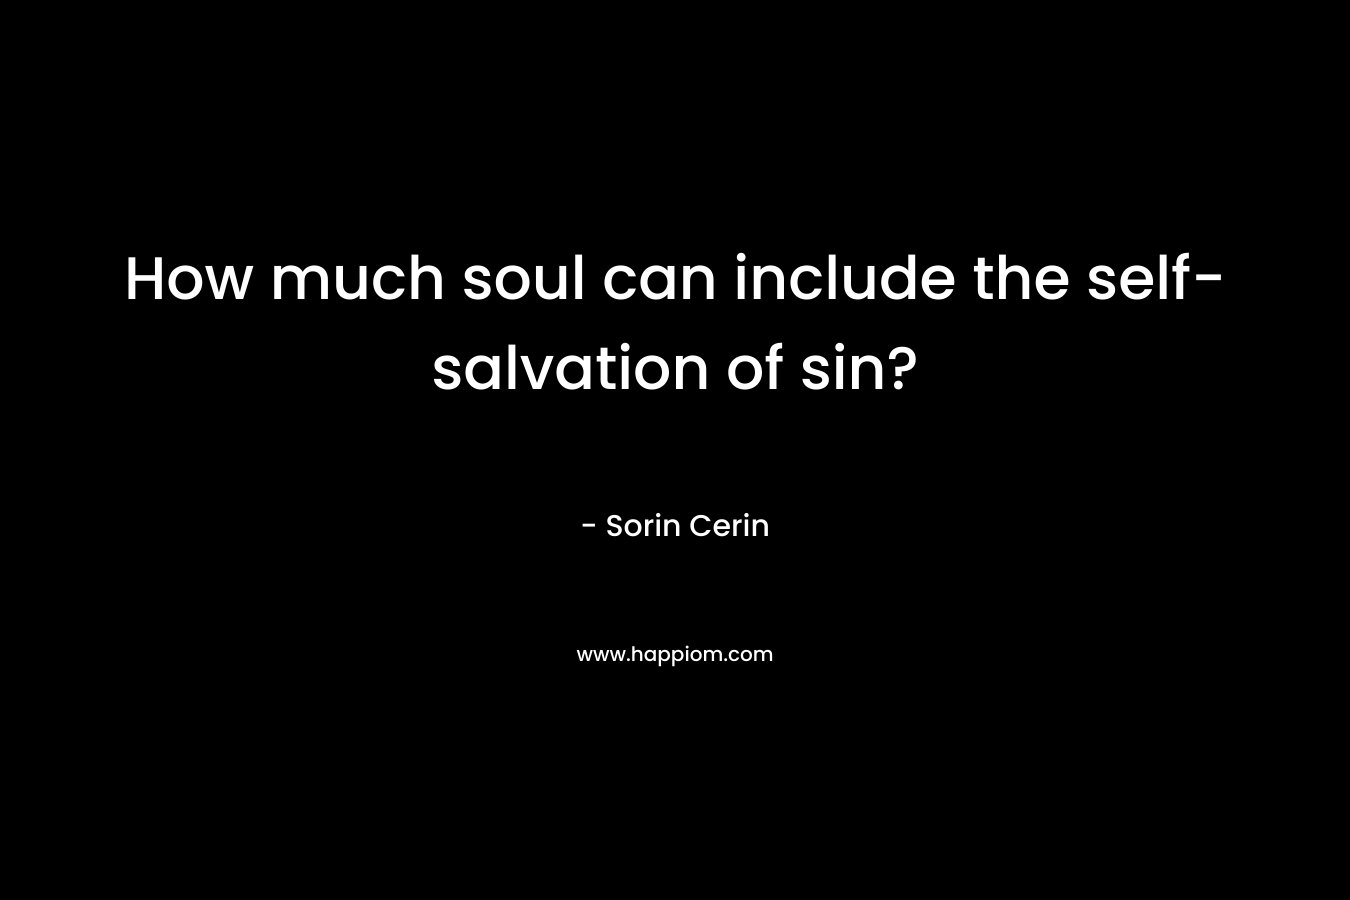 How much soul can include the self-salvation of sin? – Sorin Cerin